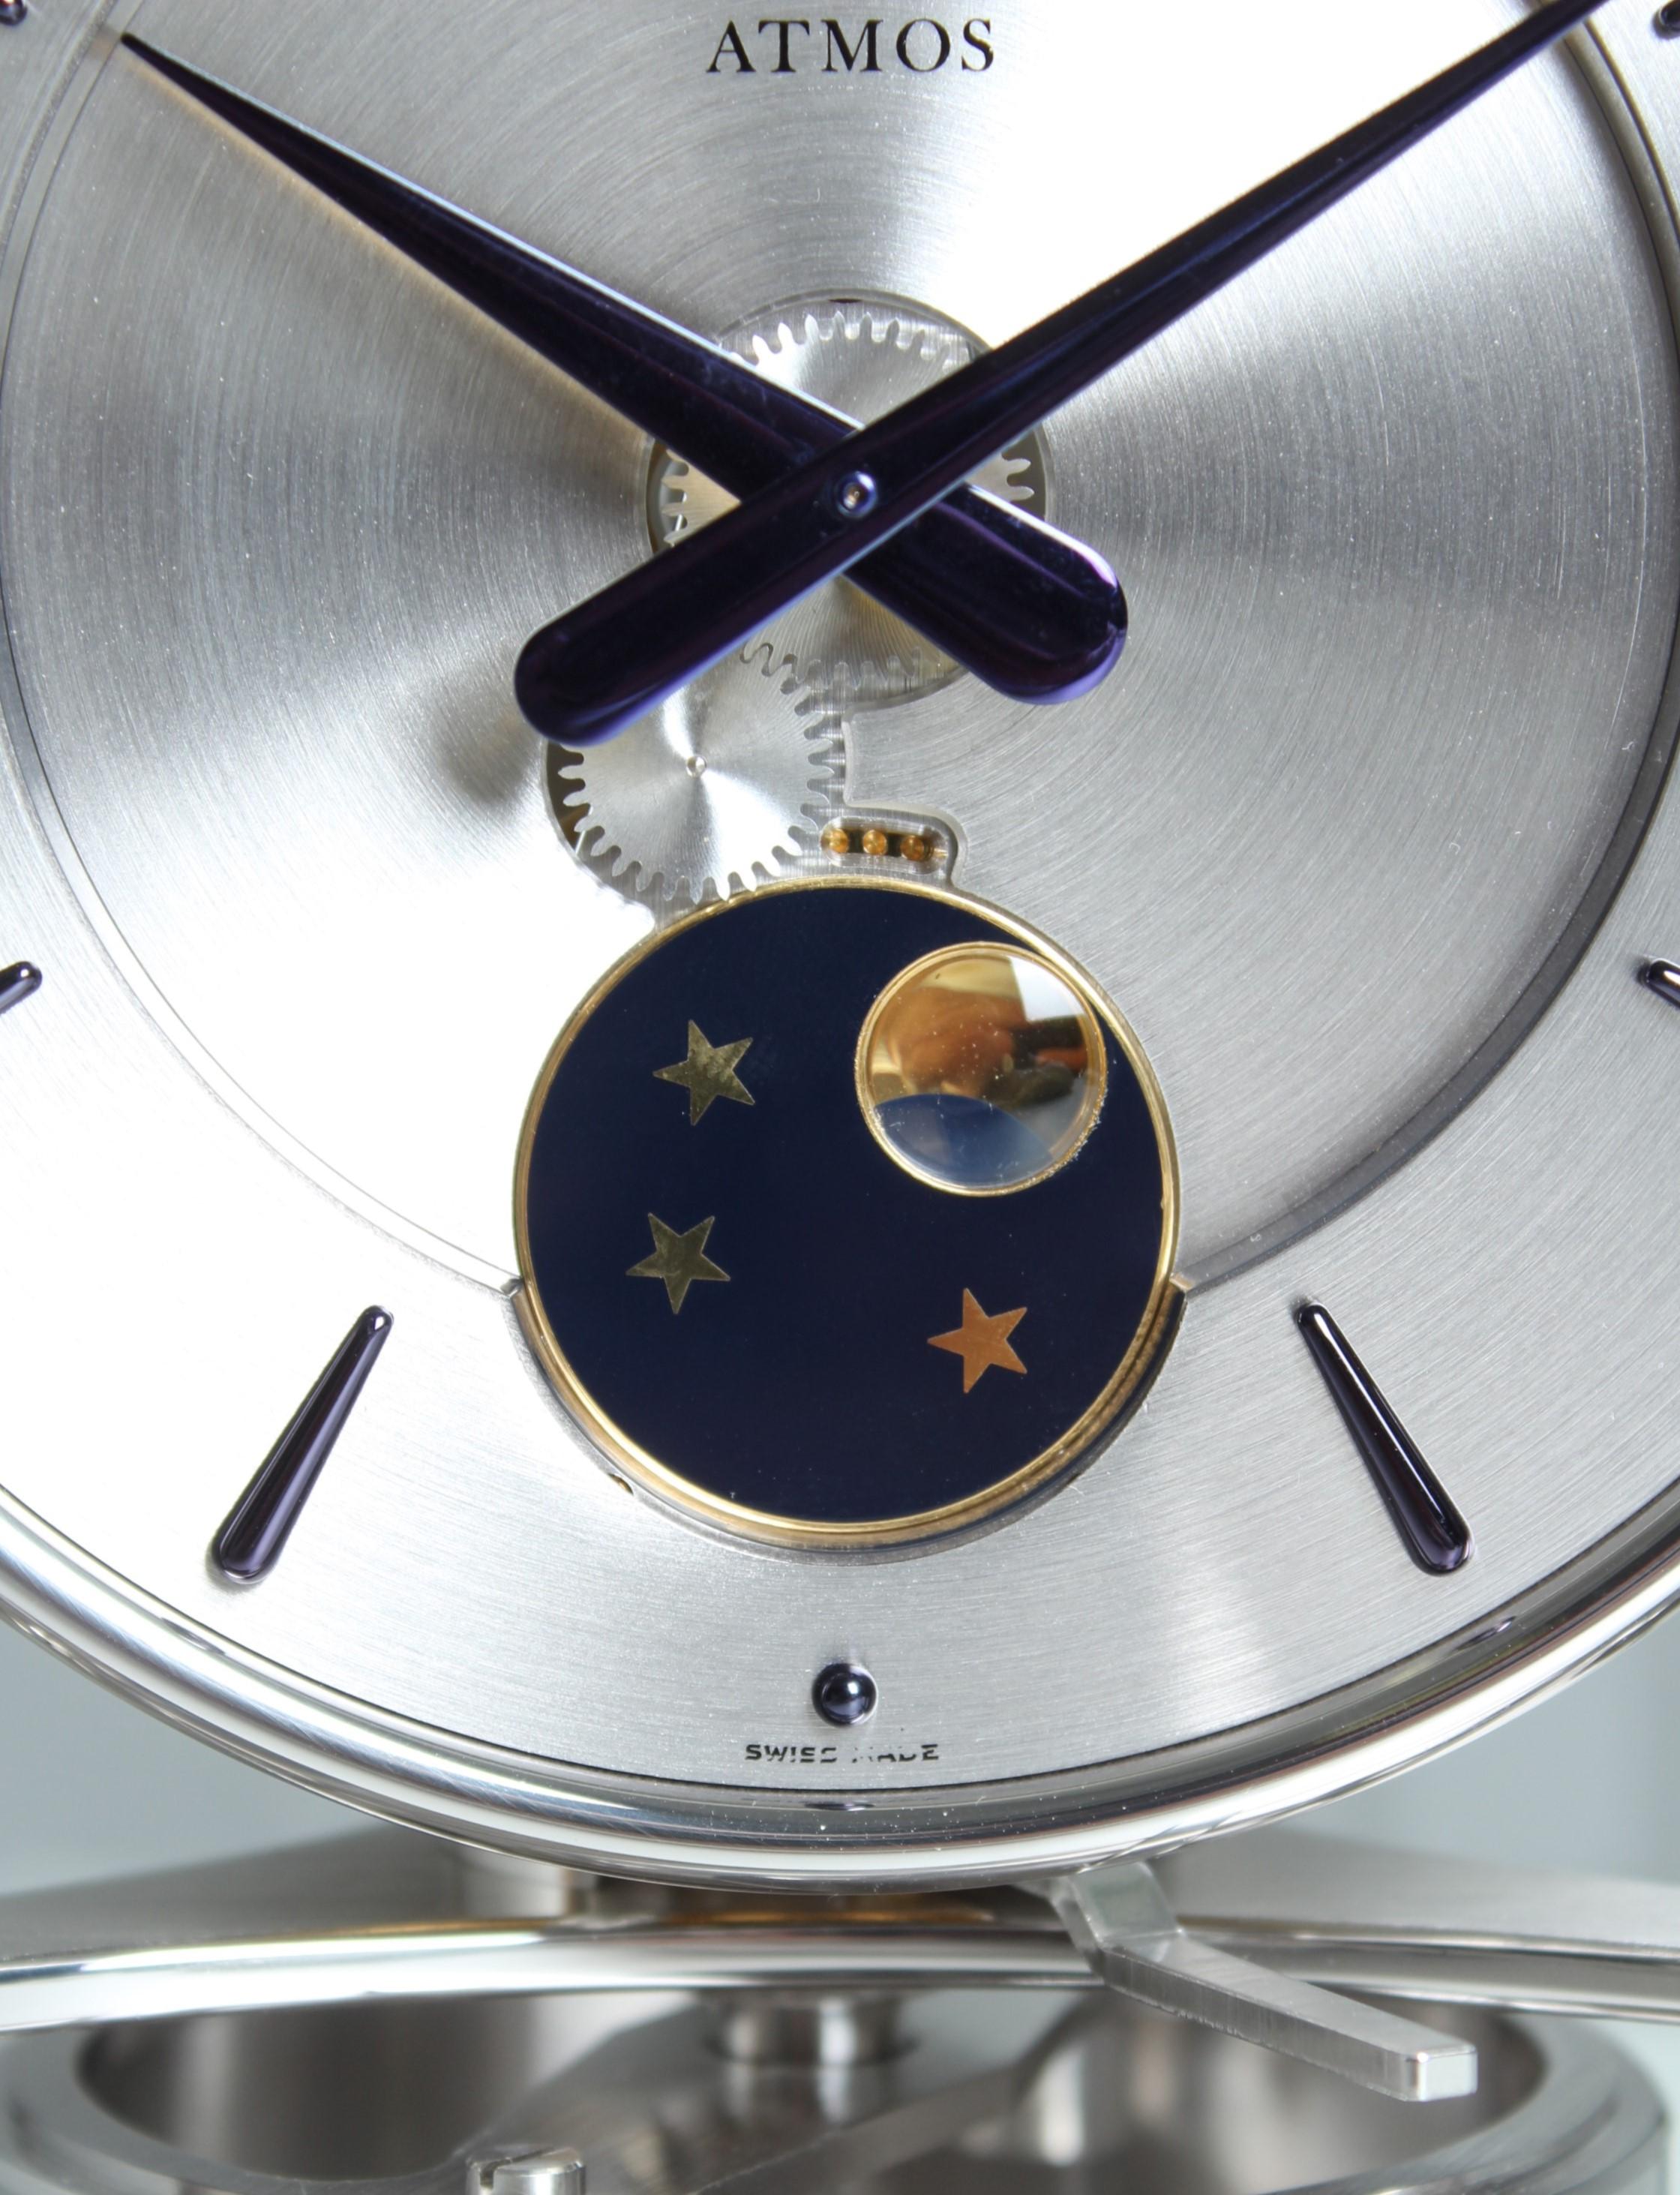 Jaeger LeCoultre, Atmos Clock with Moon Phase, Rhodium-plated with Wall Console In Good Condition For Sale In Greven, DE